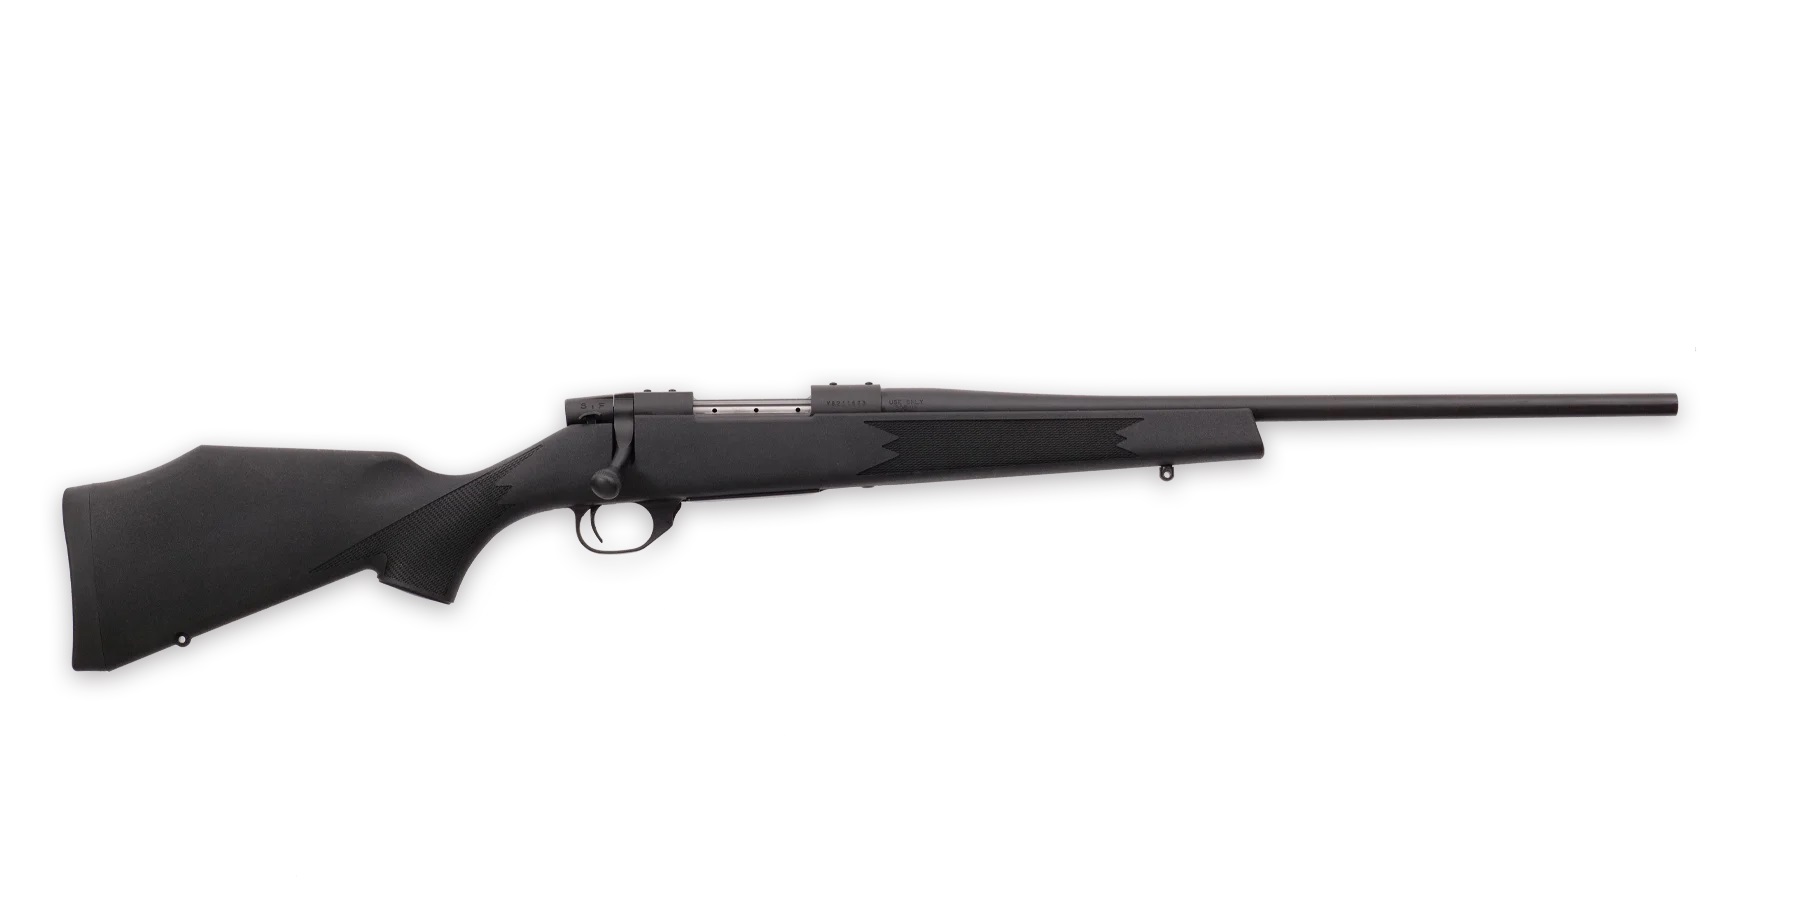 VANGUARD COMPACT 350 LEGEND BOLT-ACTION RIFLE WITH BLACK SYNTHETIC STOCK